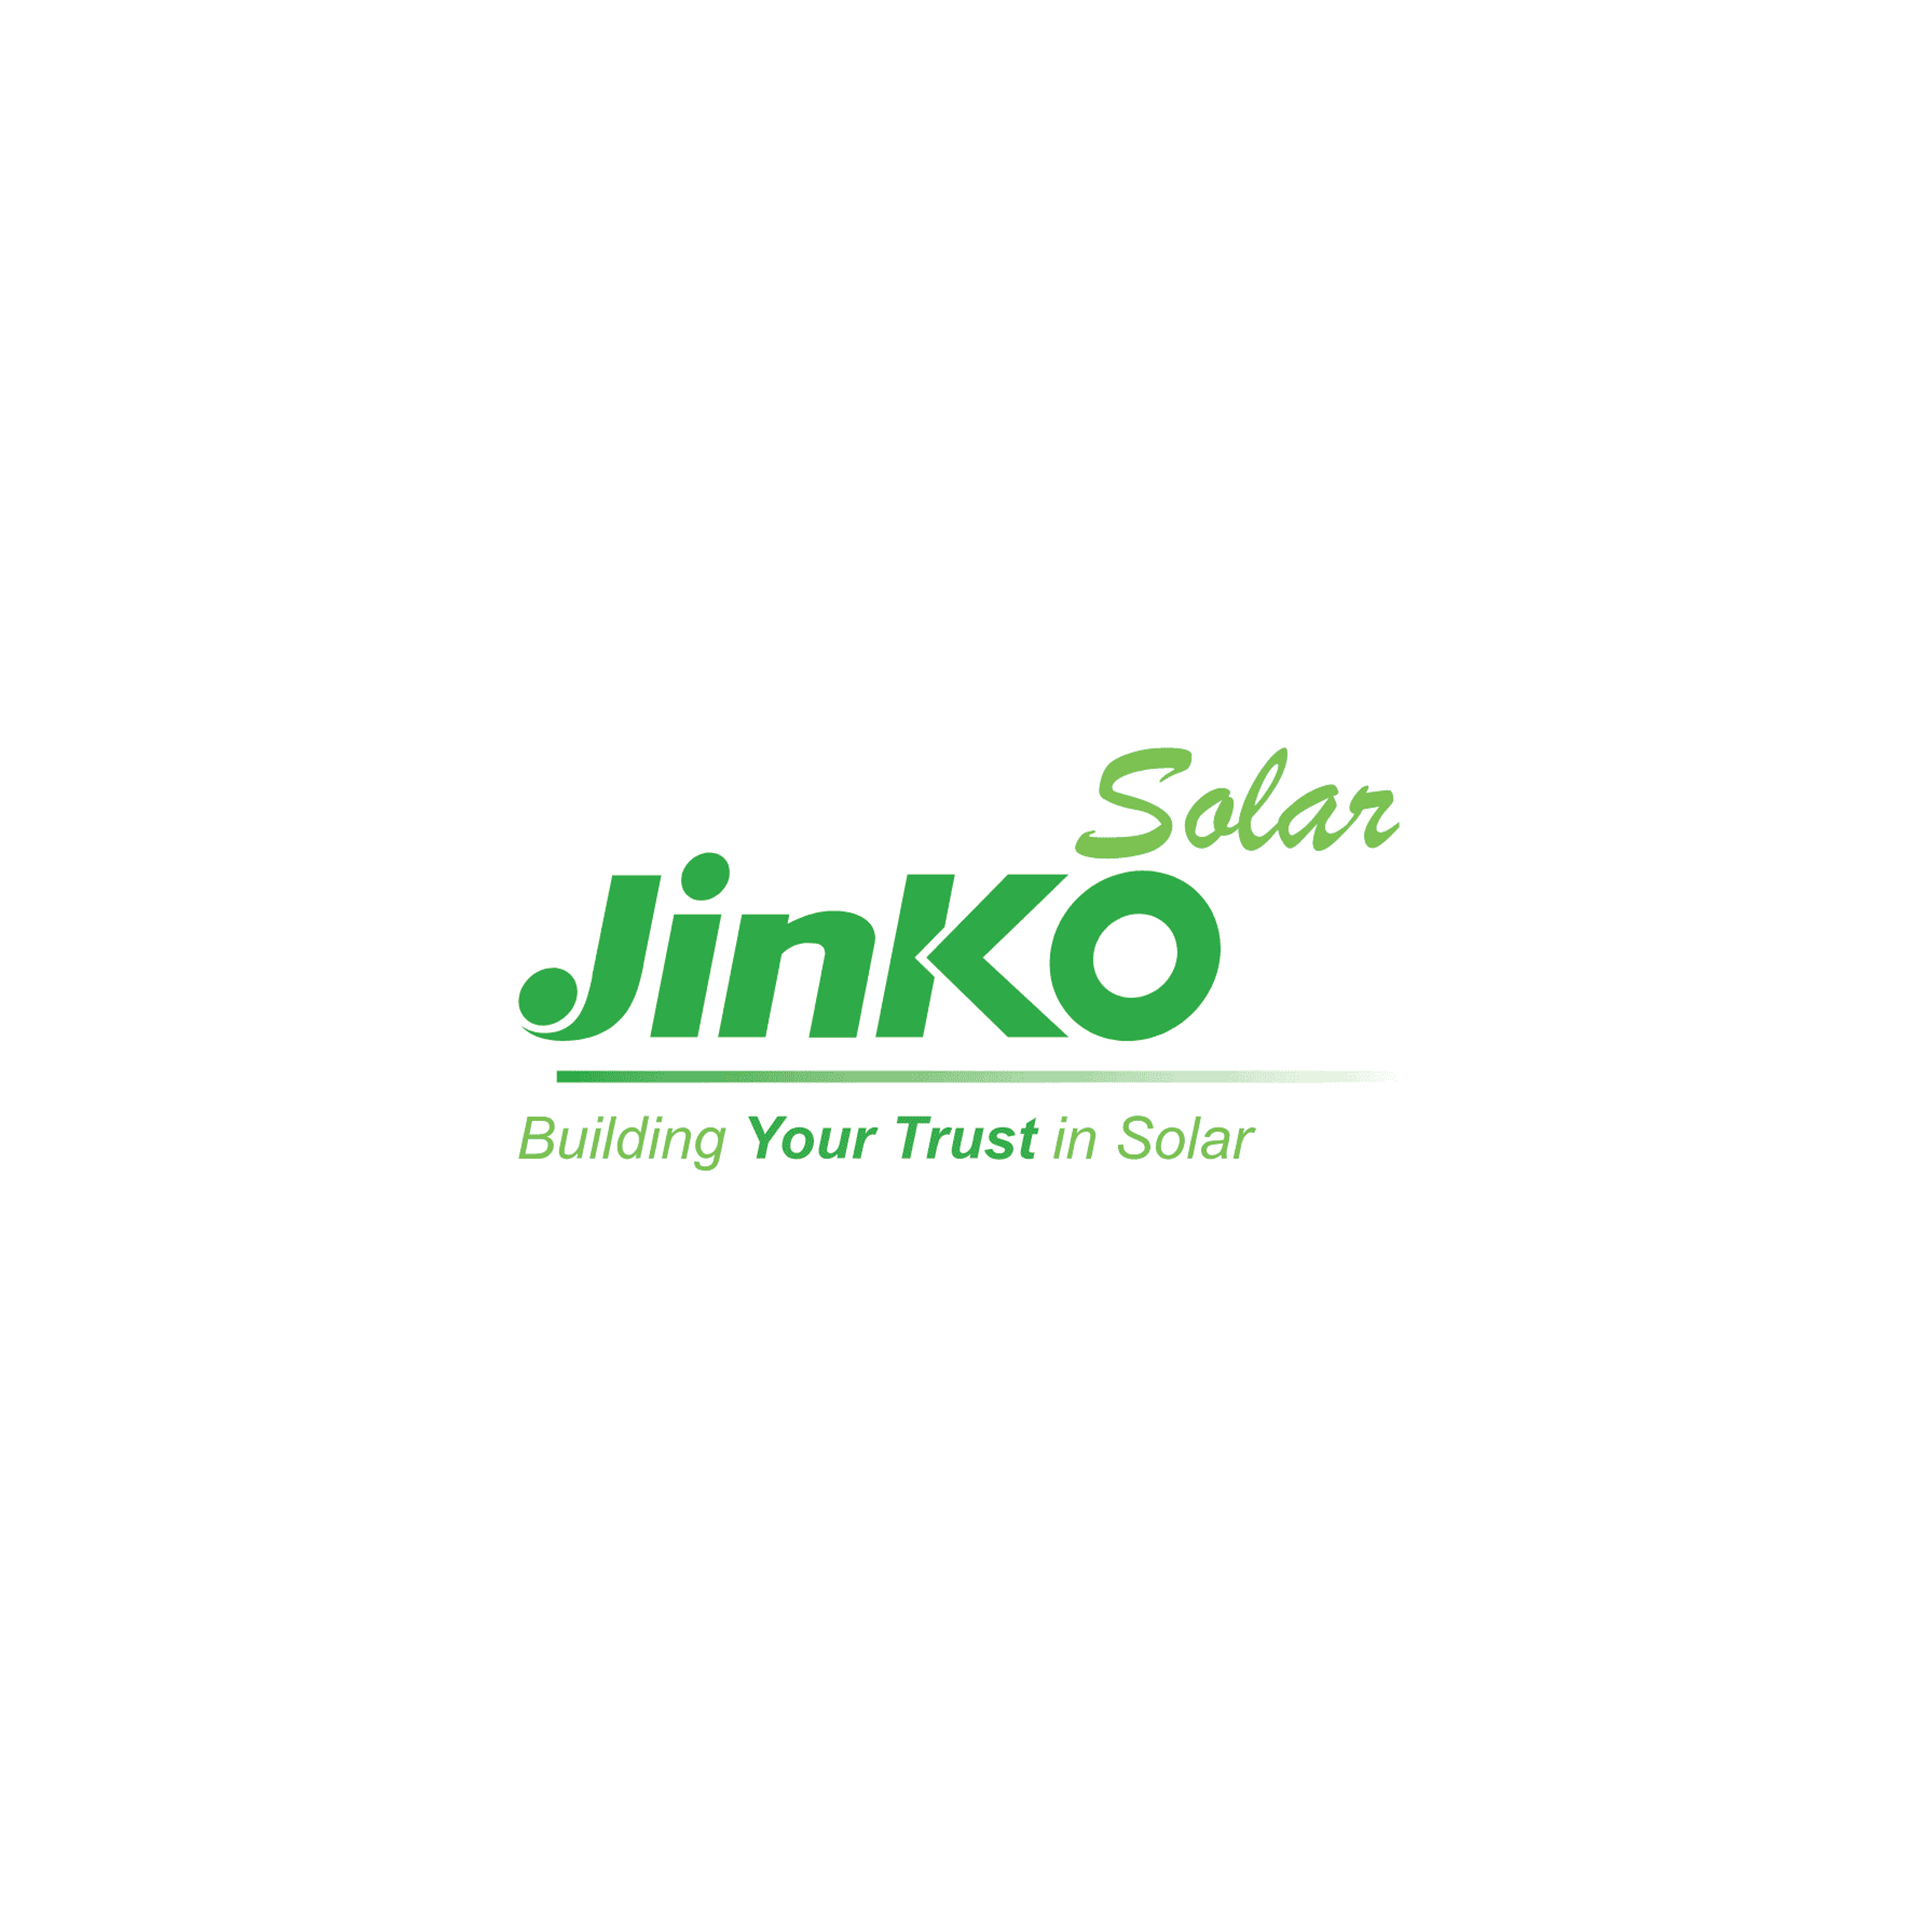 The logo for jinko solar is green and white and says `` building your trust in solar ''.